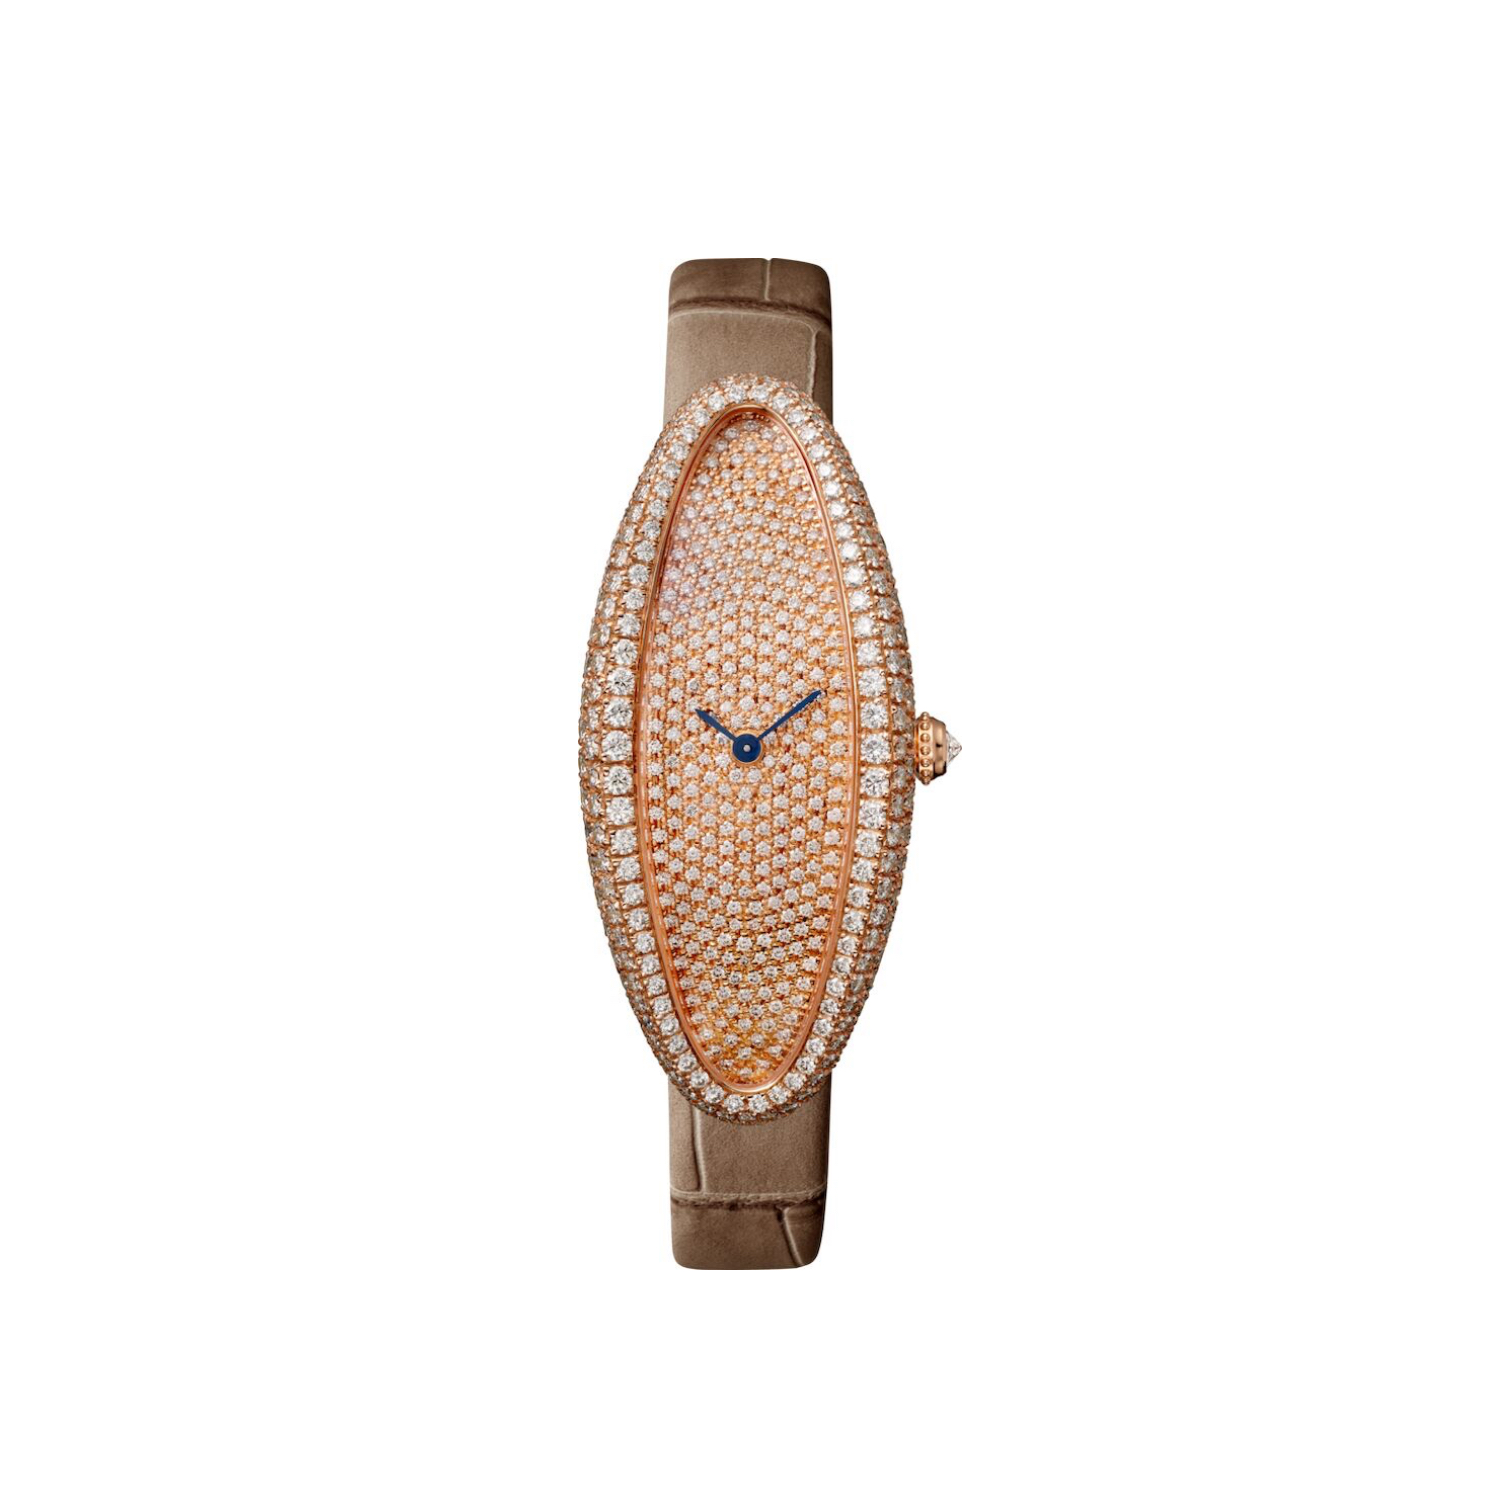 Picture of BAIGNOIRE ALLONGÉE - PINK GOLD HAND-WOUND MEDIUM